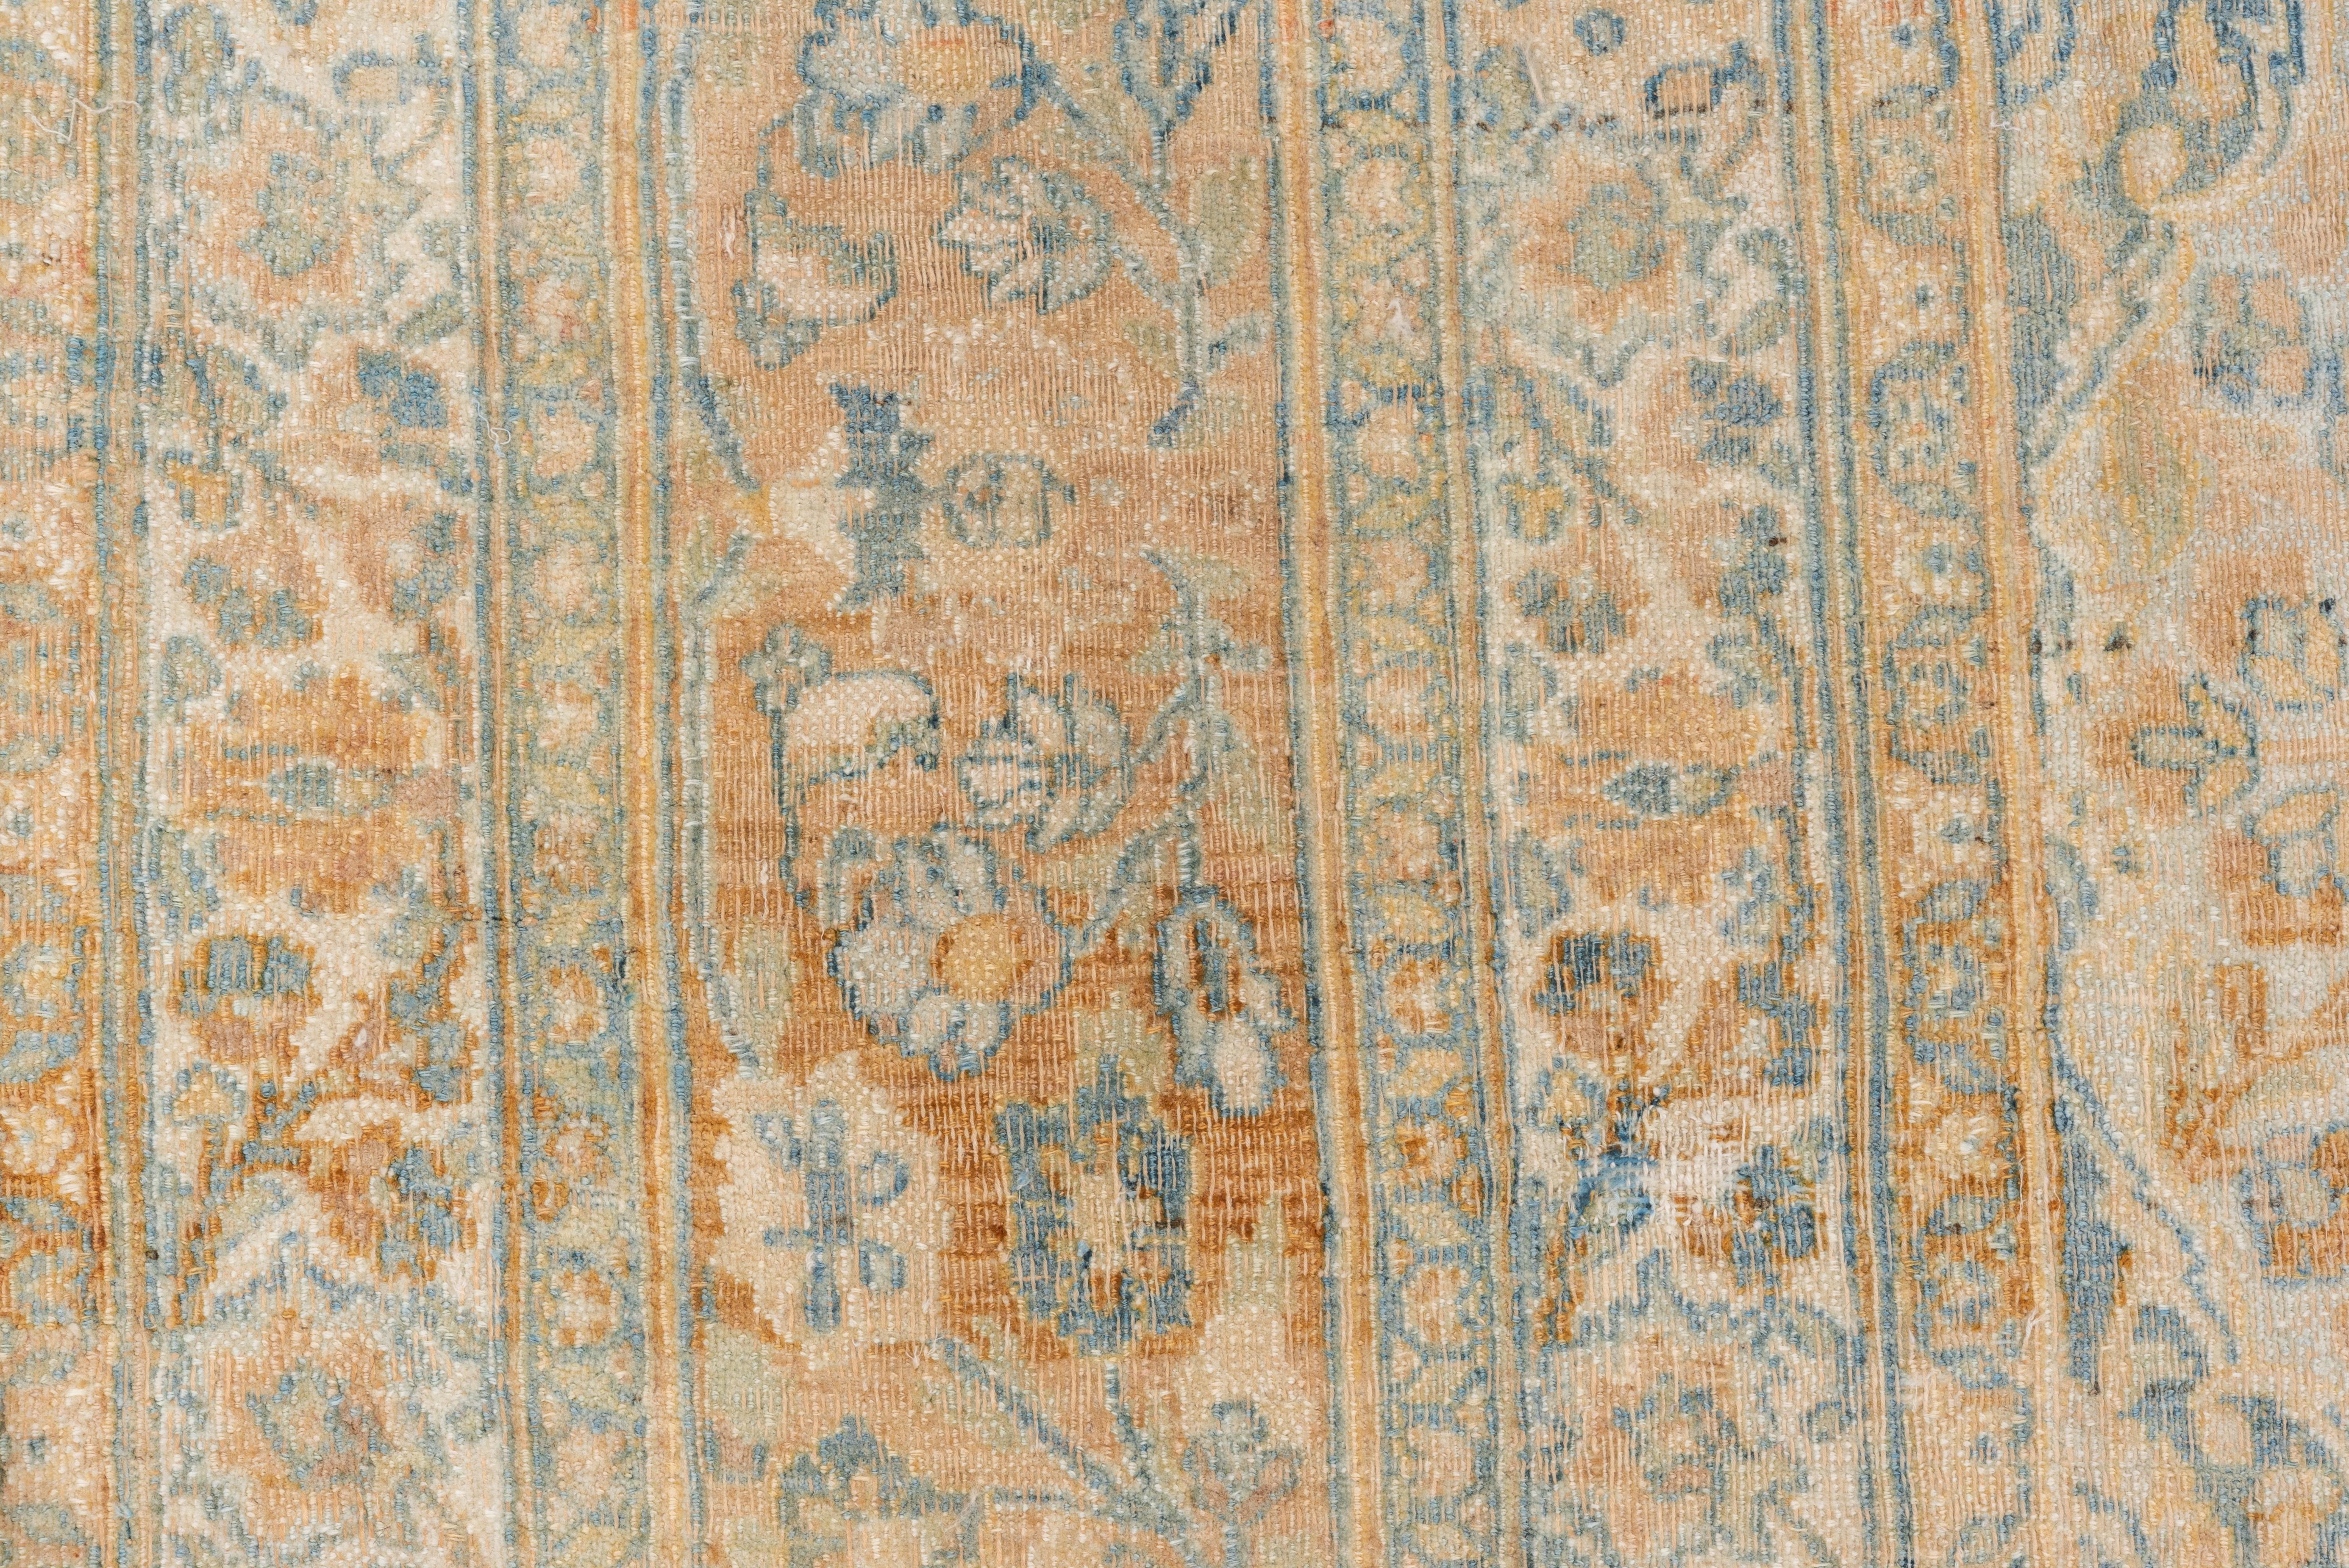 Persian Eliko Rugs by David Ariel Antique Blue and Peach Khorassan Rug, circa 1930s For Sale